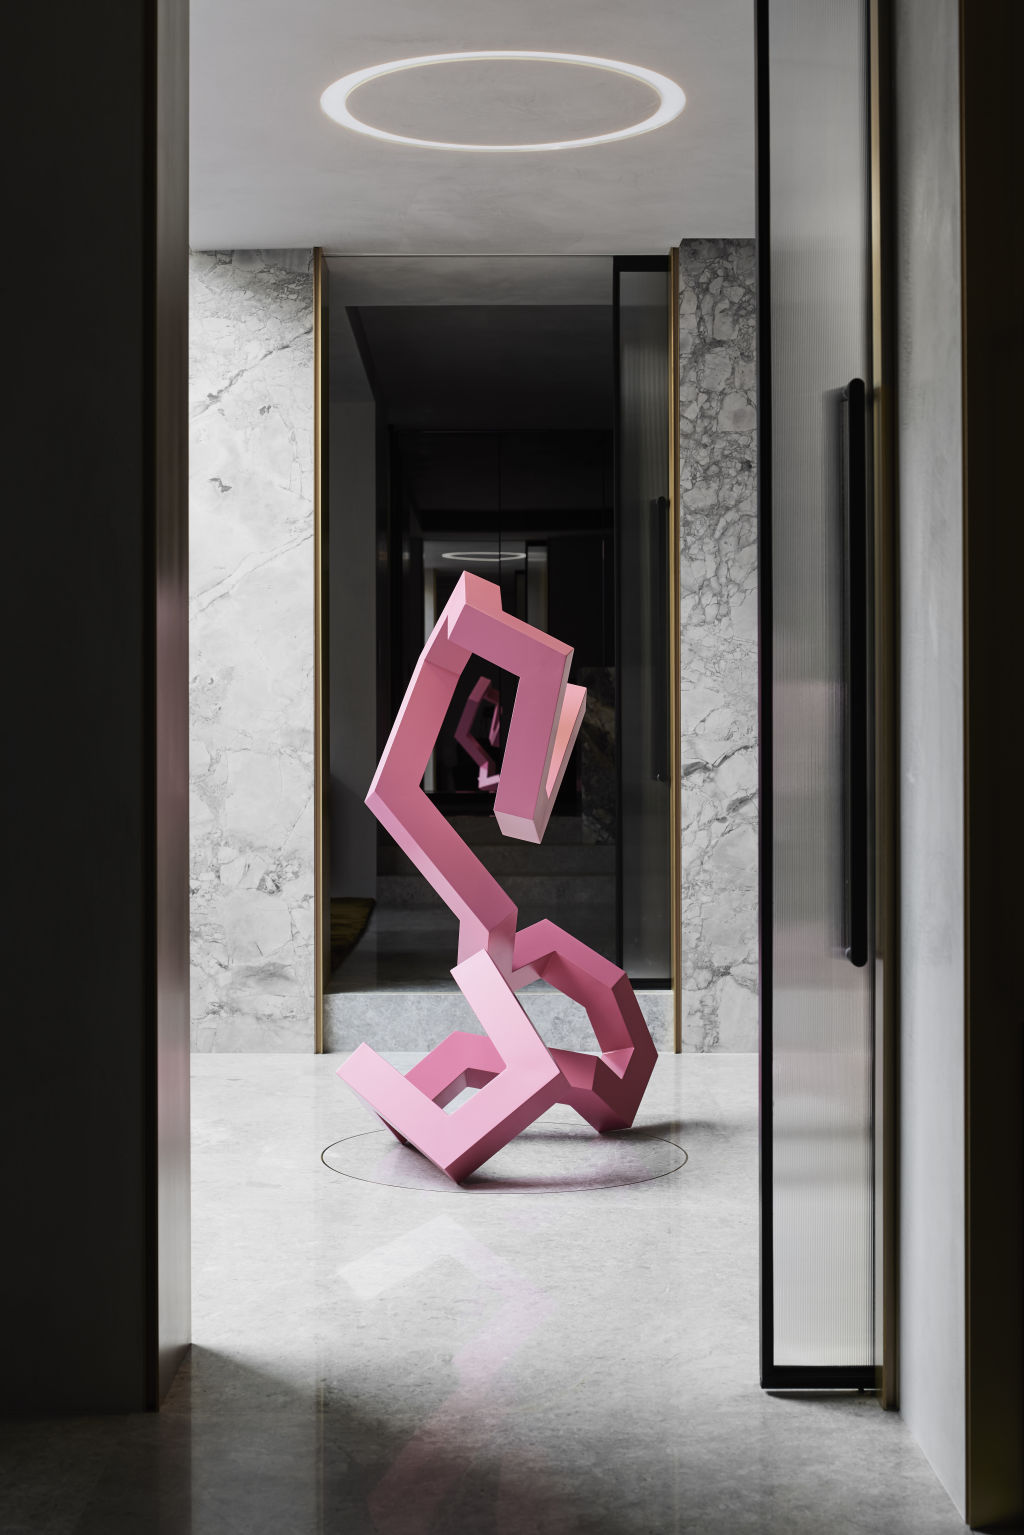 The strict monochromatic scheme allows the artwork to pop. Untitled Pink artwork by Caleb Shae. Photo: Sharyn Cairns